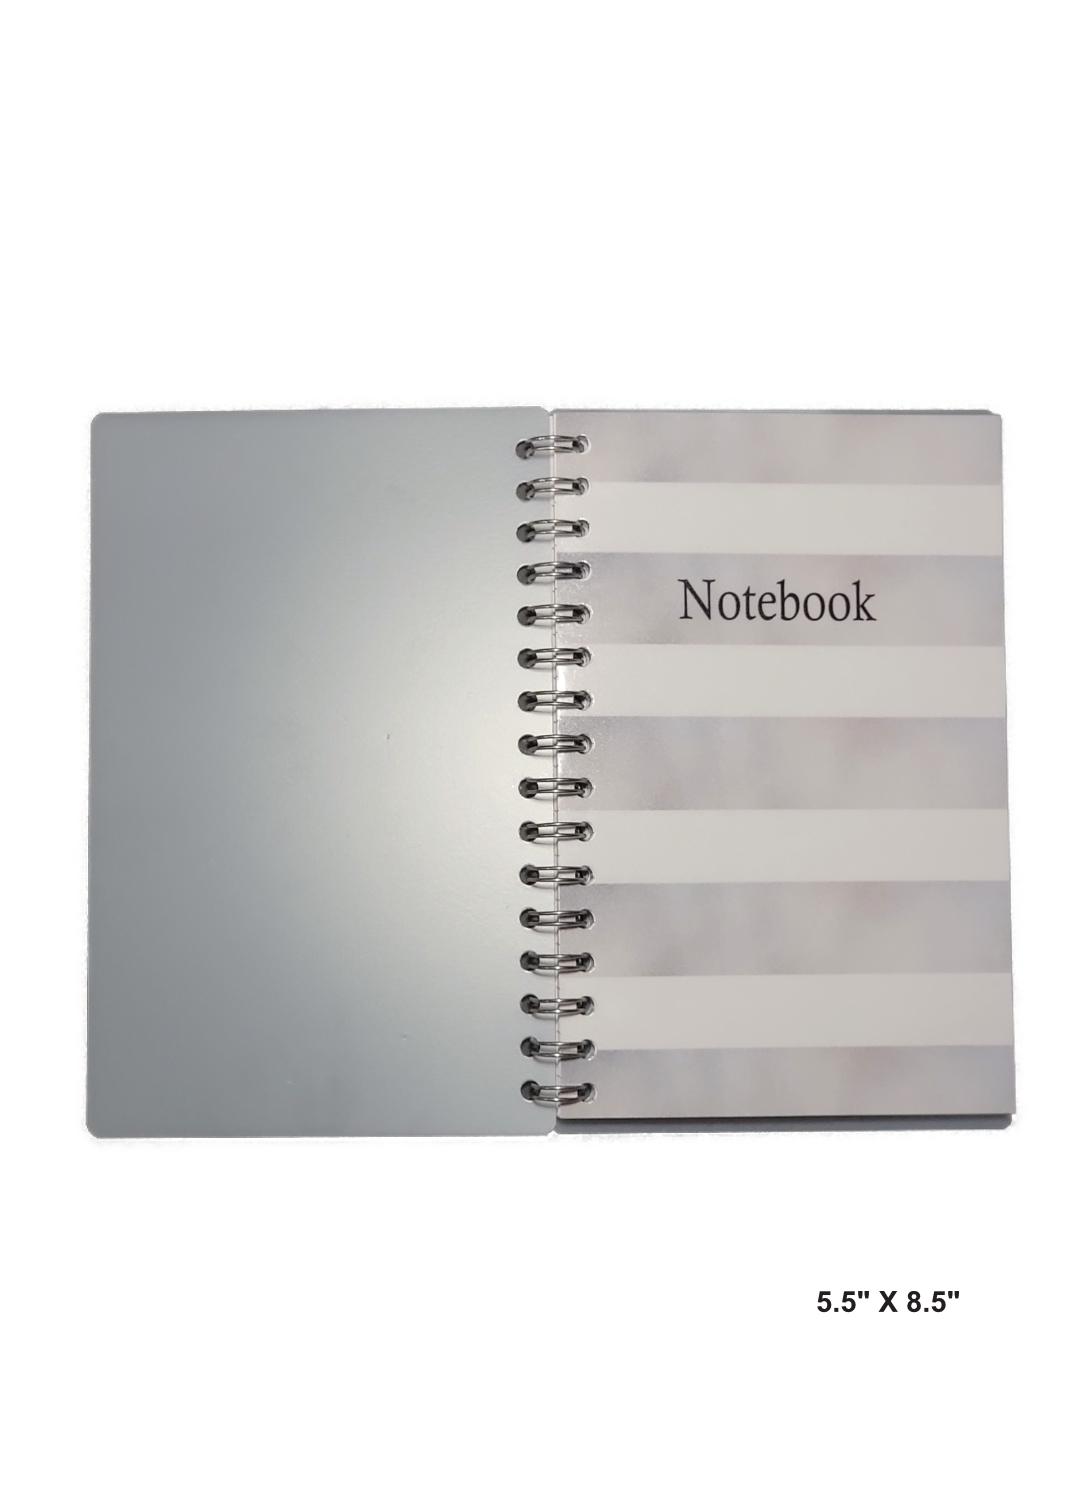 Image of hand-made 5.5" x 8.5" notebook with silver and white stripes cover. The notebook's pages are lined for writing or journaling.